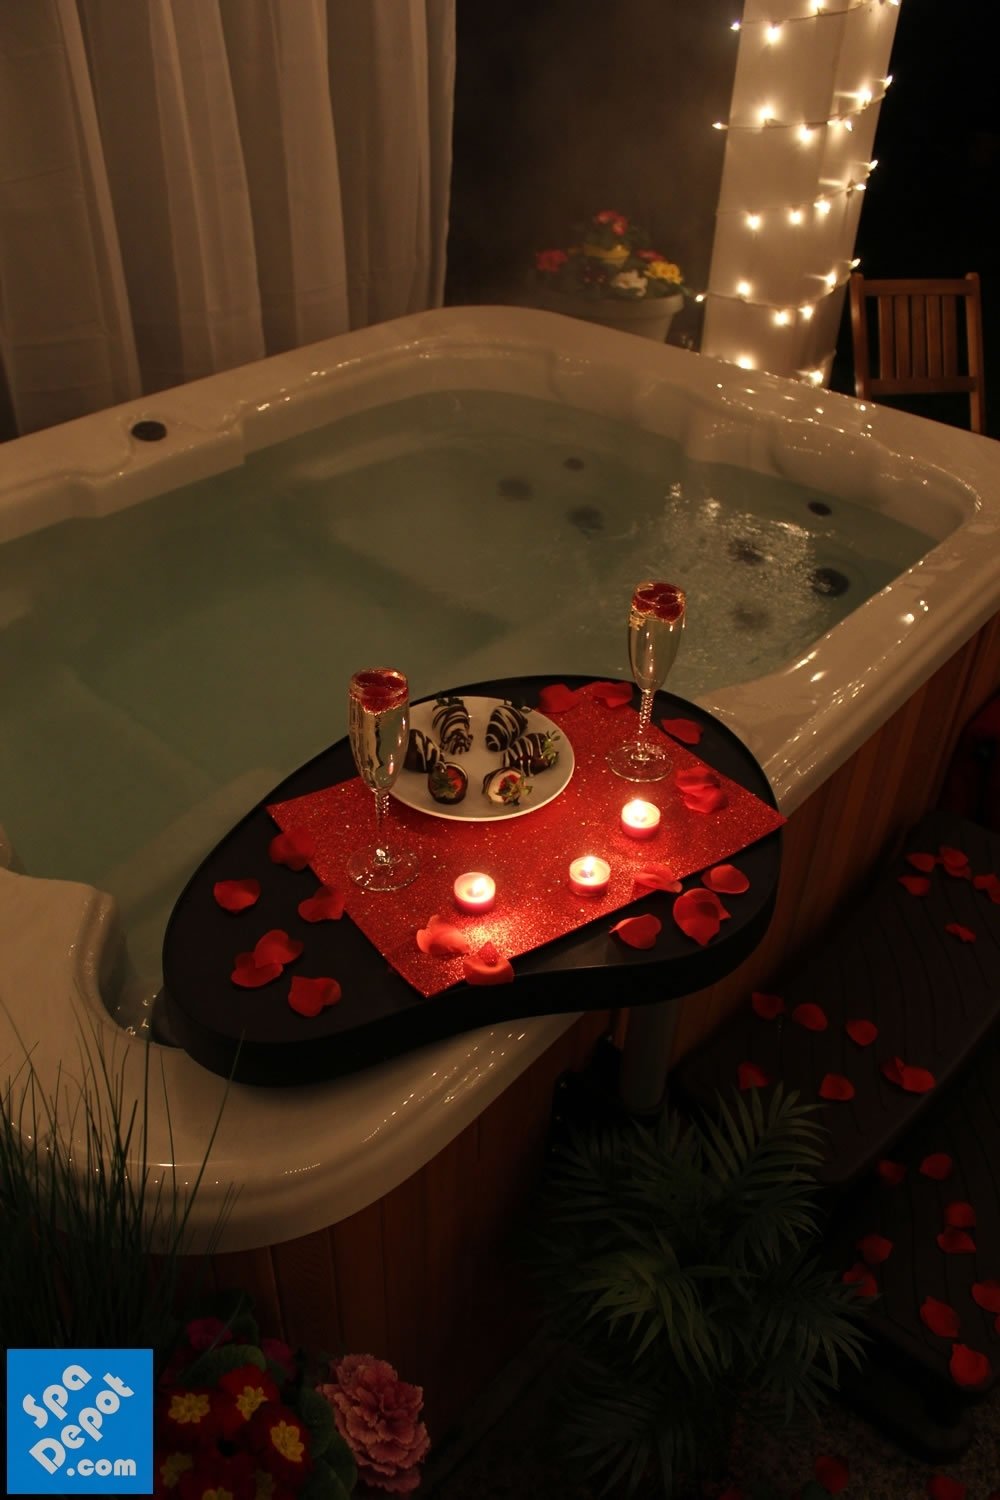 10 Stylish Romantic Ideas To Do At Home 5 ways to create a romantic valentines day at home holidays 6 2022